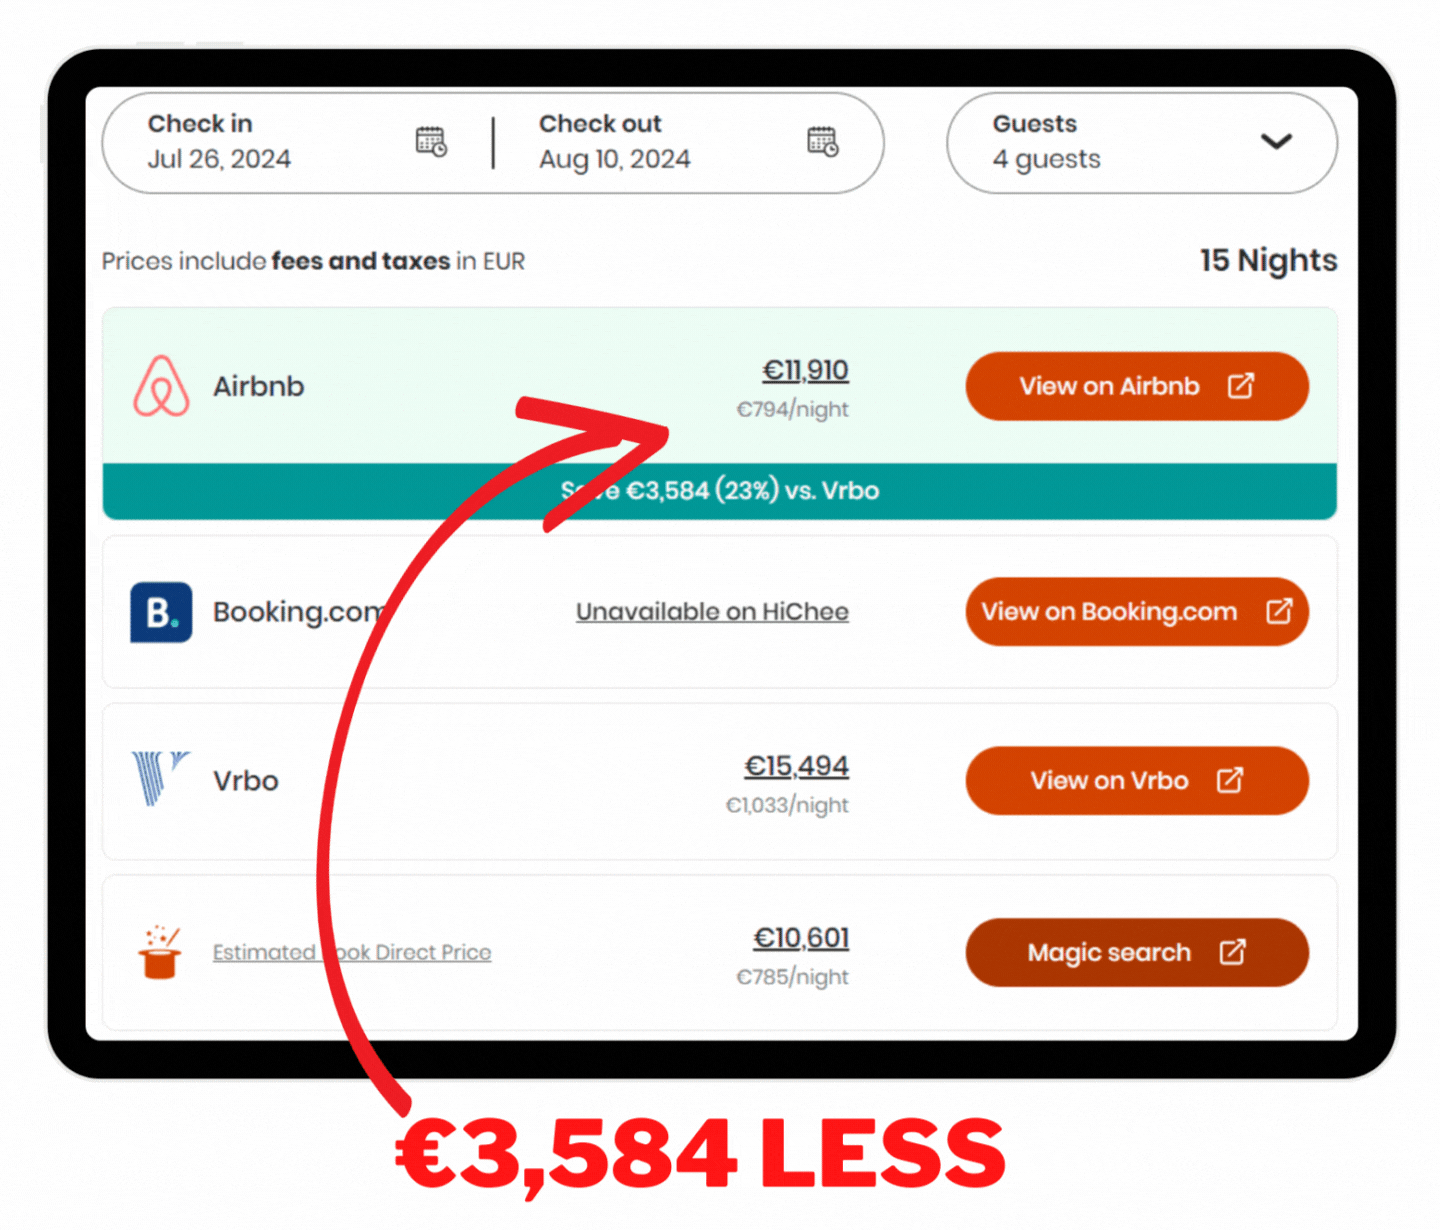 Save a massive three and a half thousand Euro by booking through Airbnb